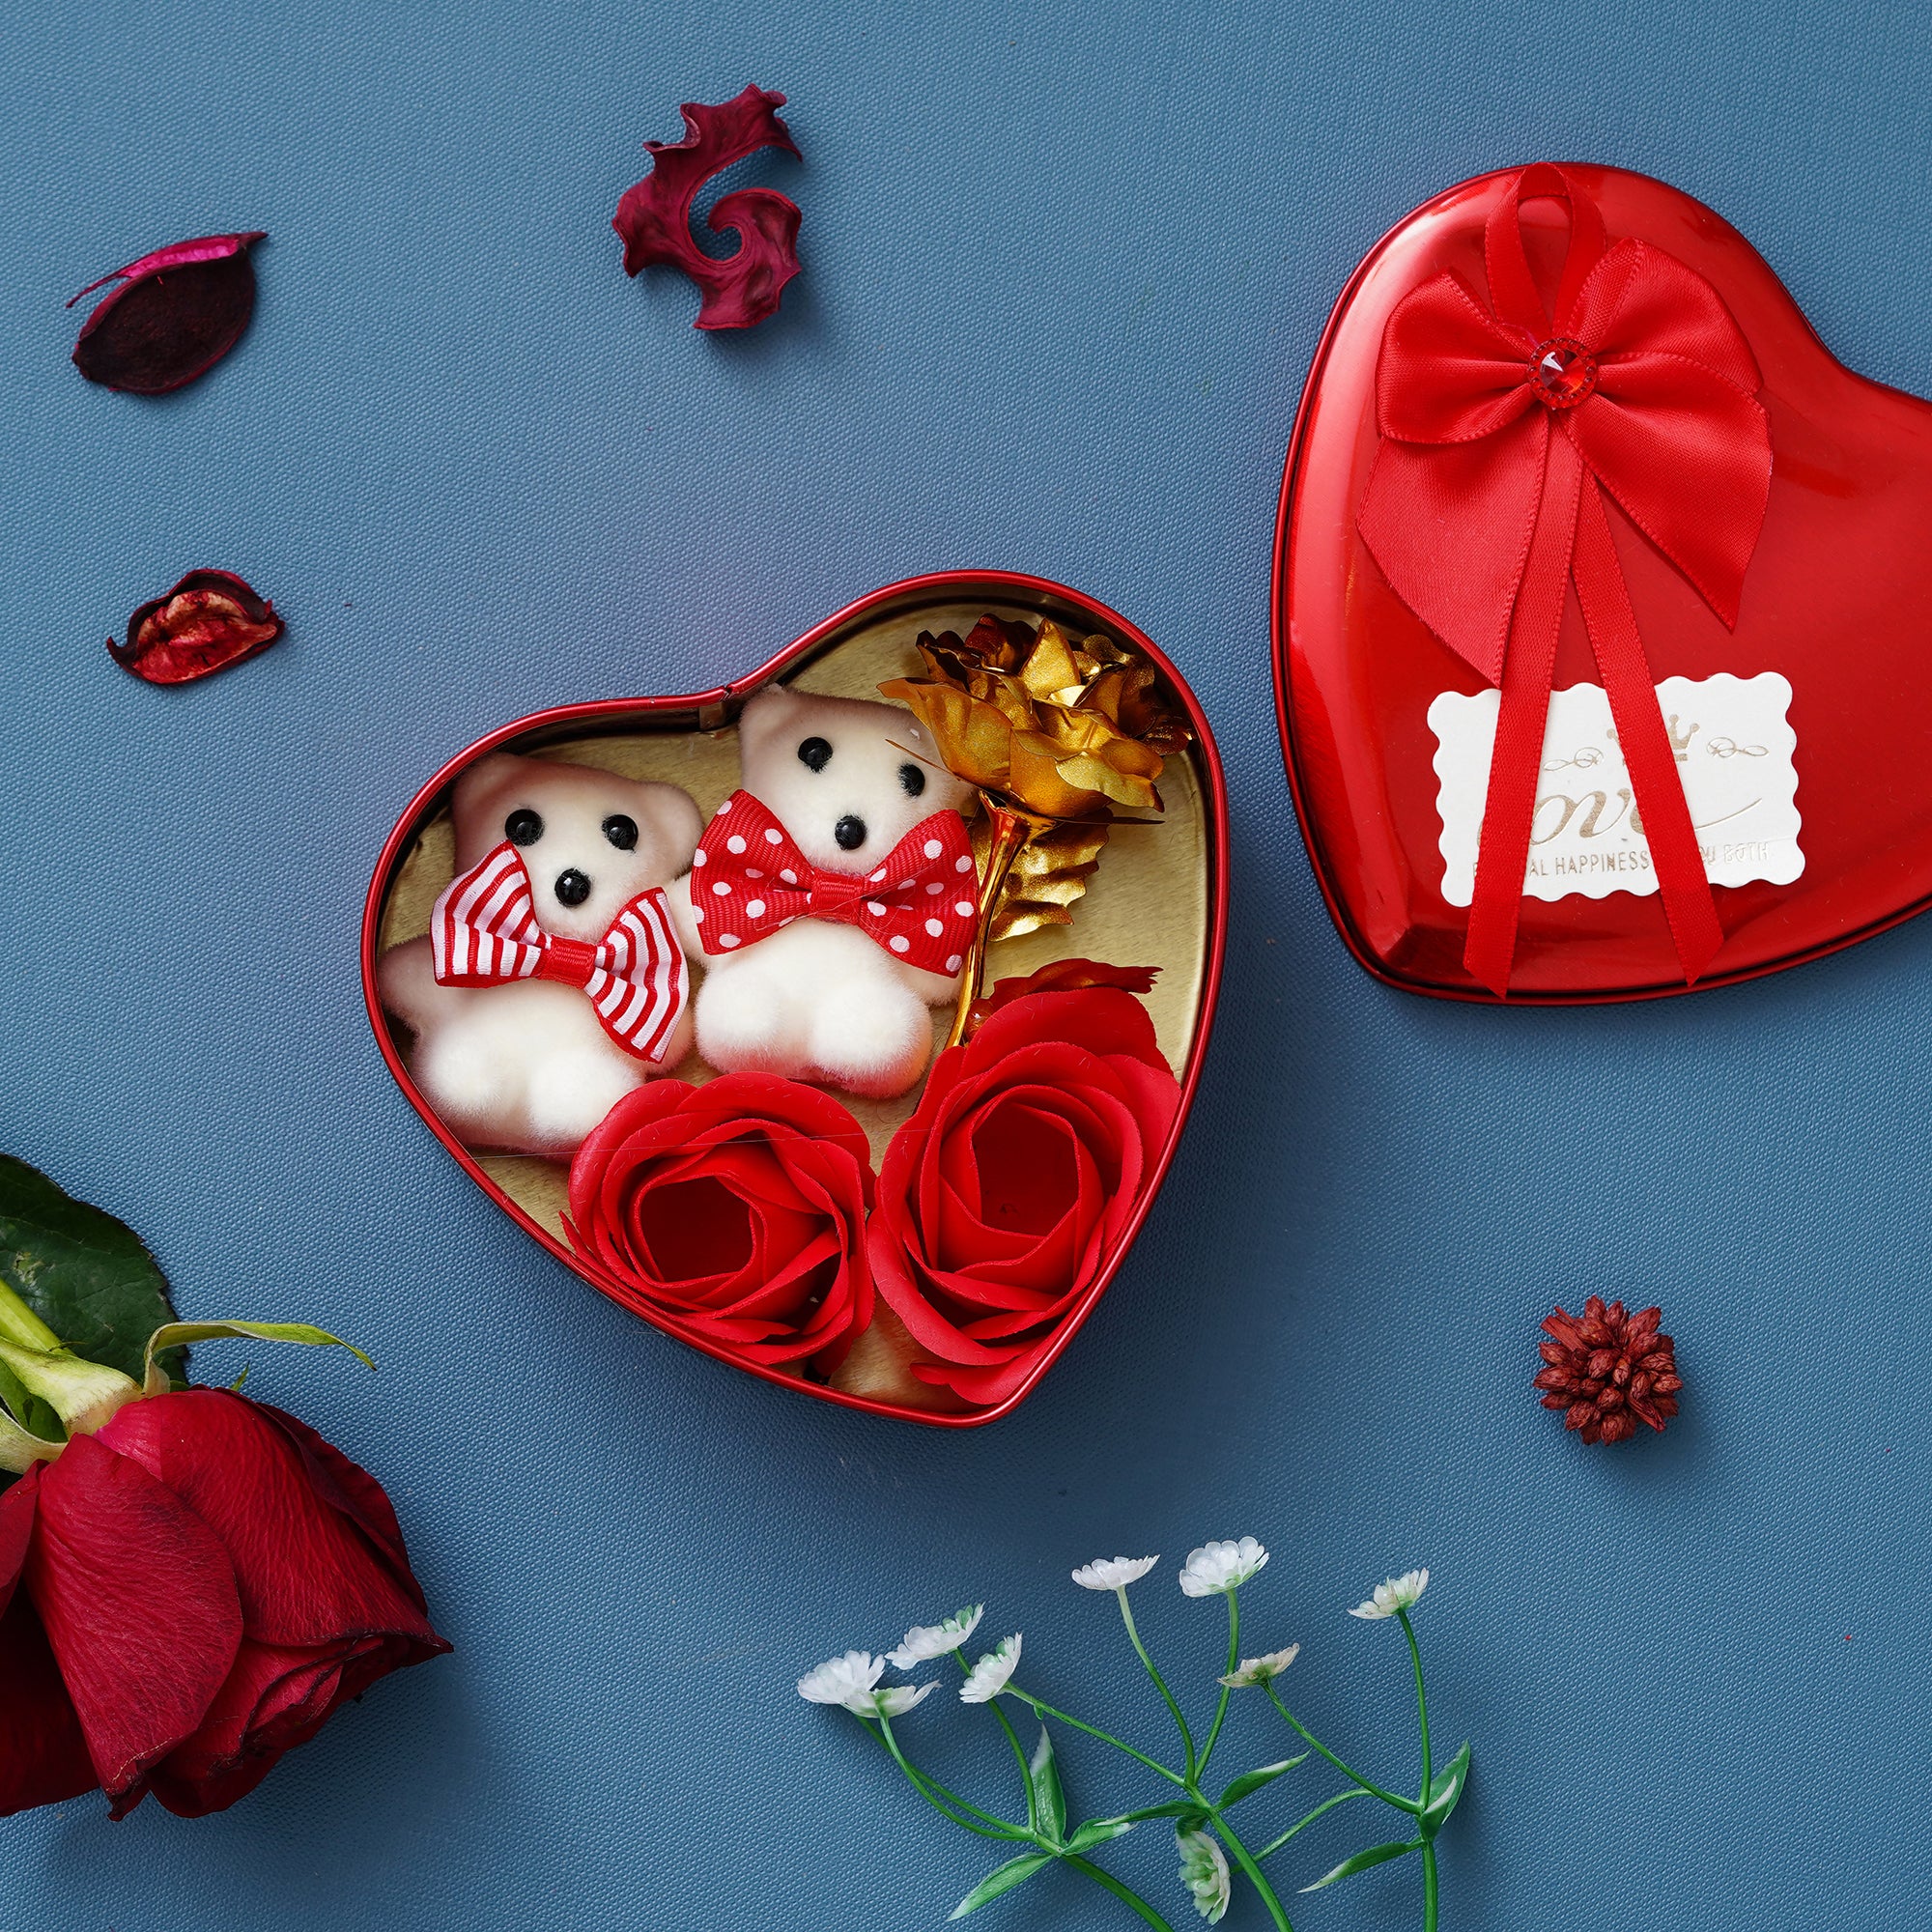 Red Heart Shaped Gift Box with 1 Golden Rose, 3 Red Roses, 1 Teddy Bear and a Card